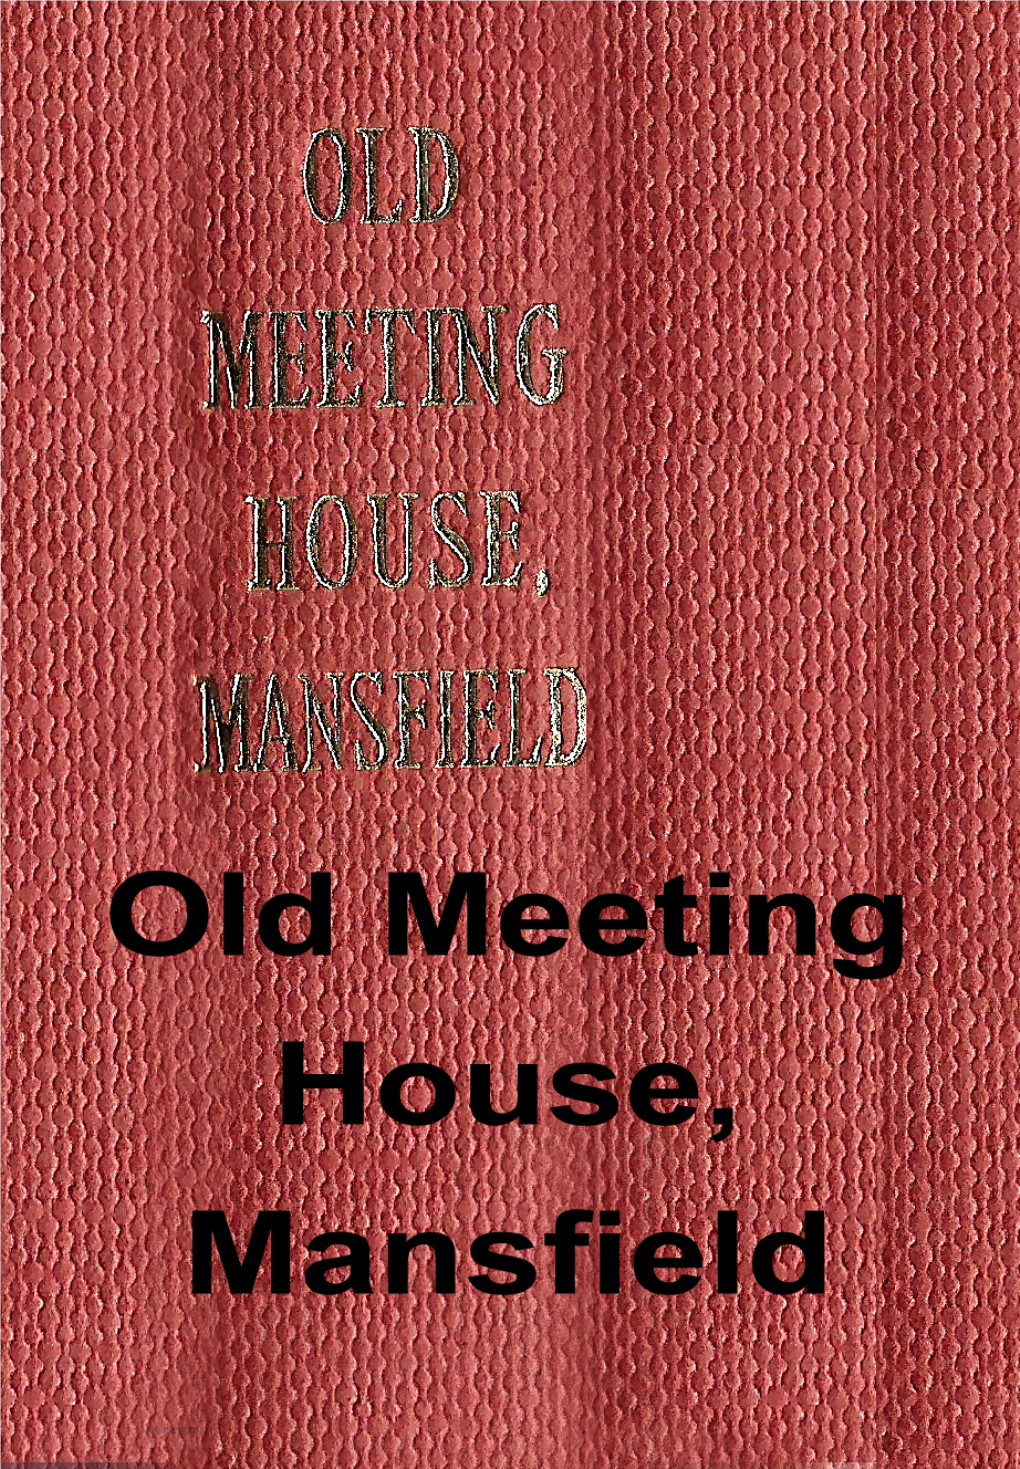 The Story of the Old Meeting House, Mansfield